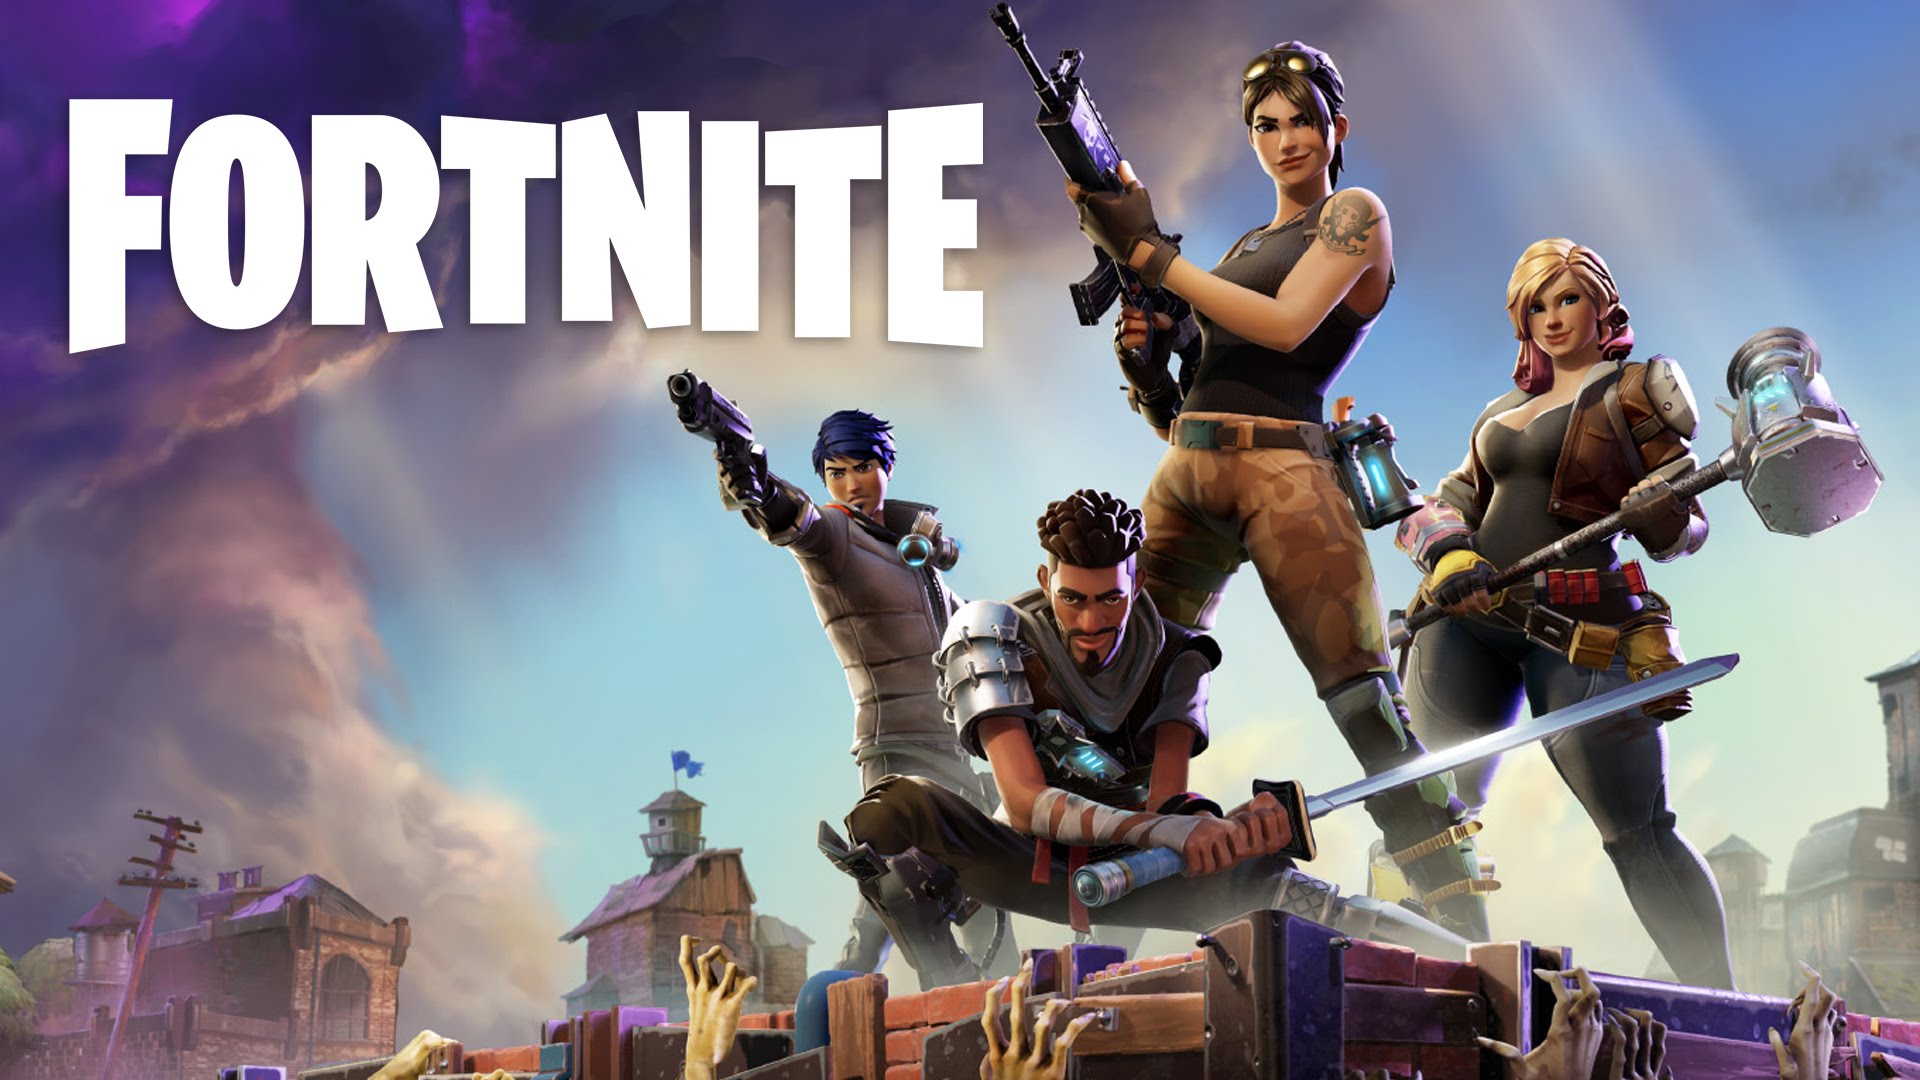 Fortnite: The billion dollar baby of the gaming industry - Times of India